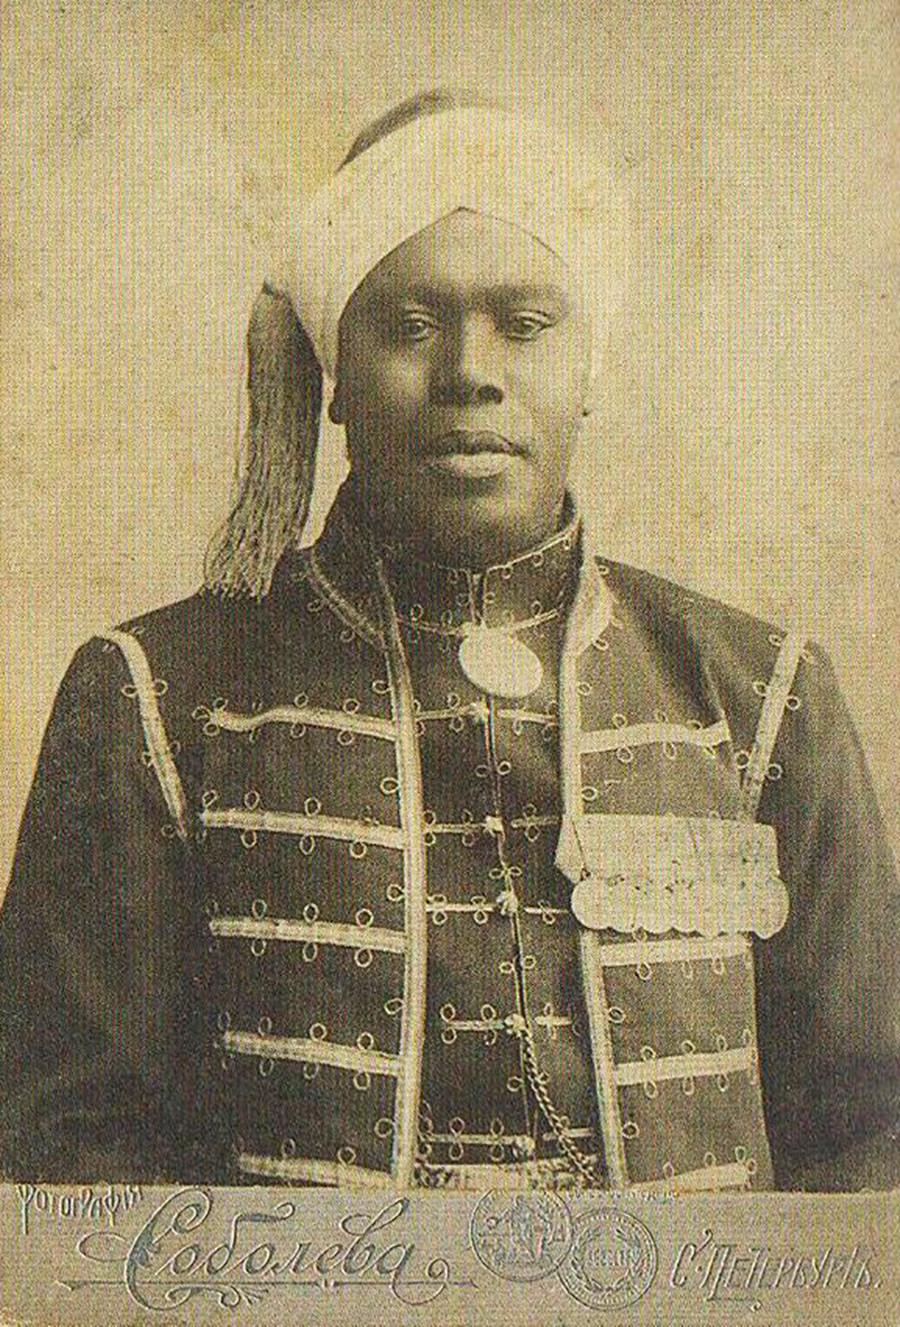 George Maria, an arap from Cape-Verde, who settled in Russia.